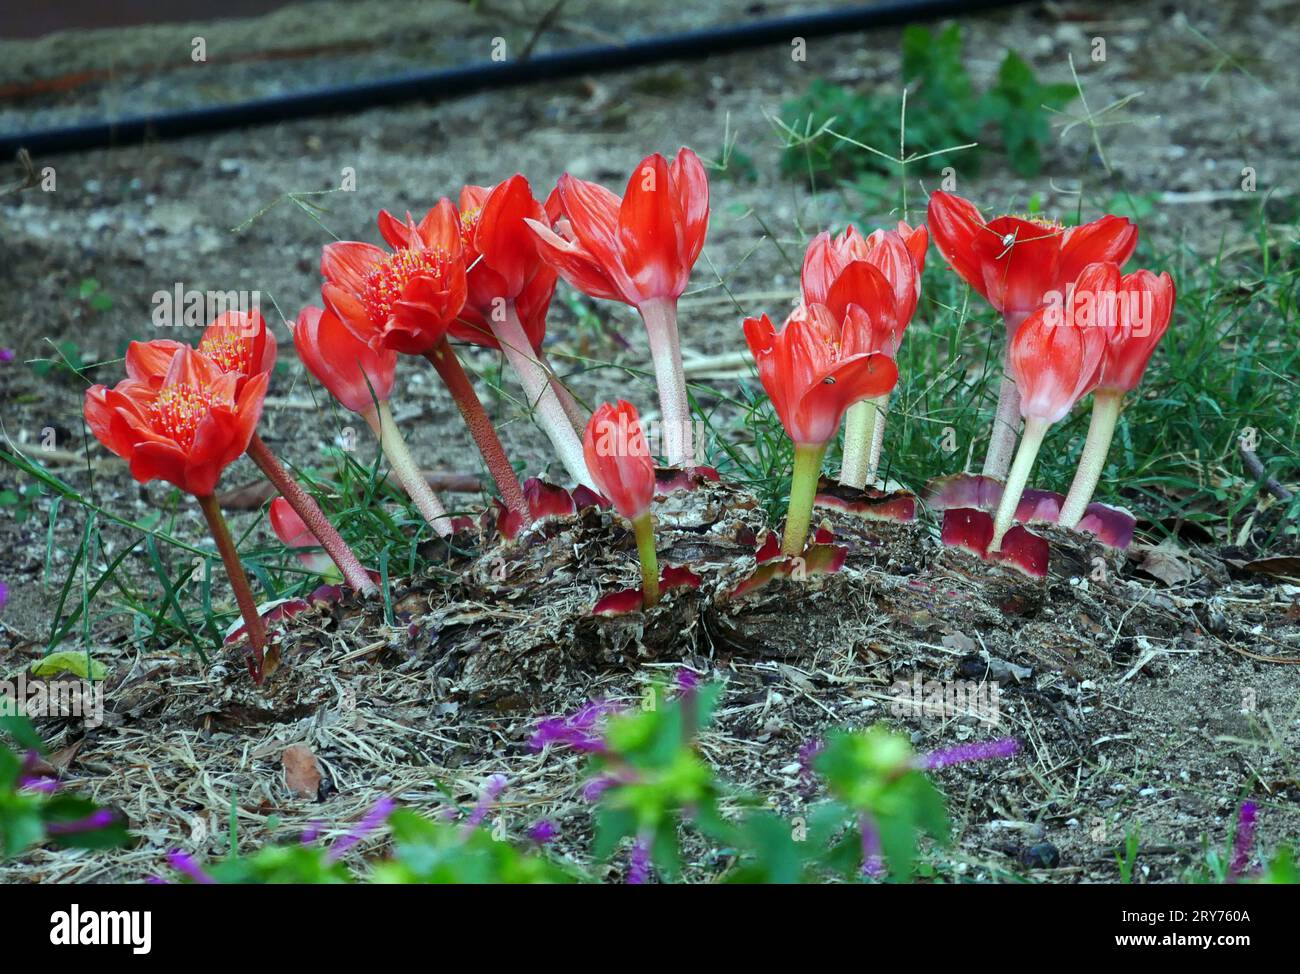 Blood Lily flower (haemanthus coccineus) close up in Sardinian garden Stock Photo